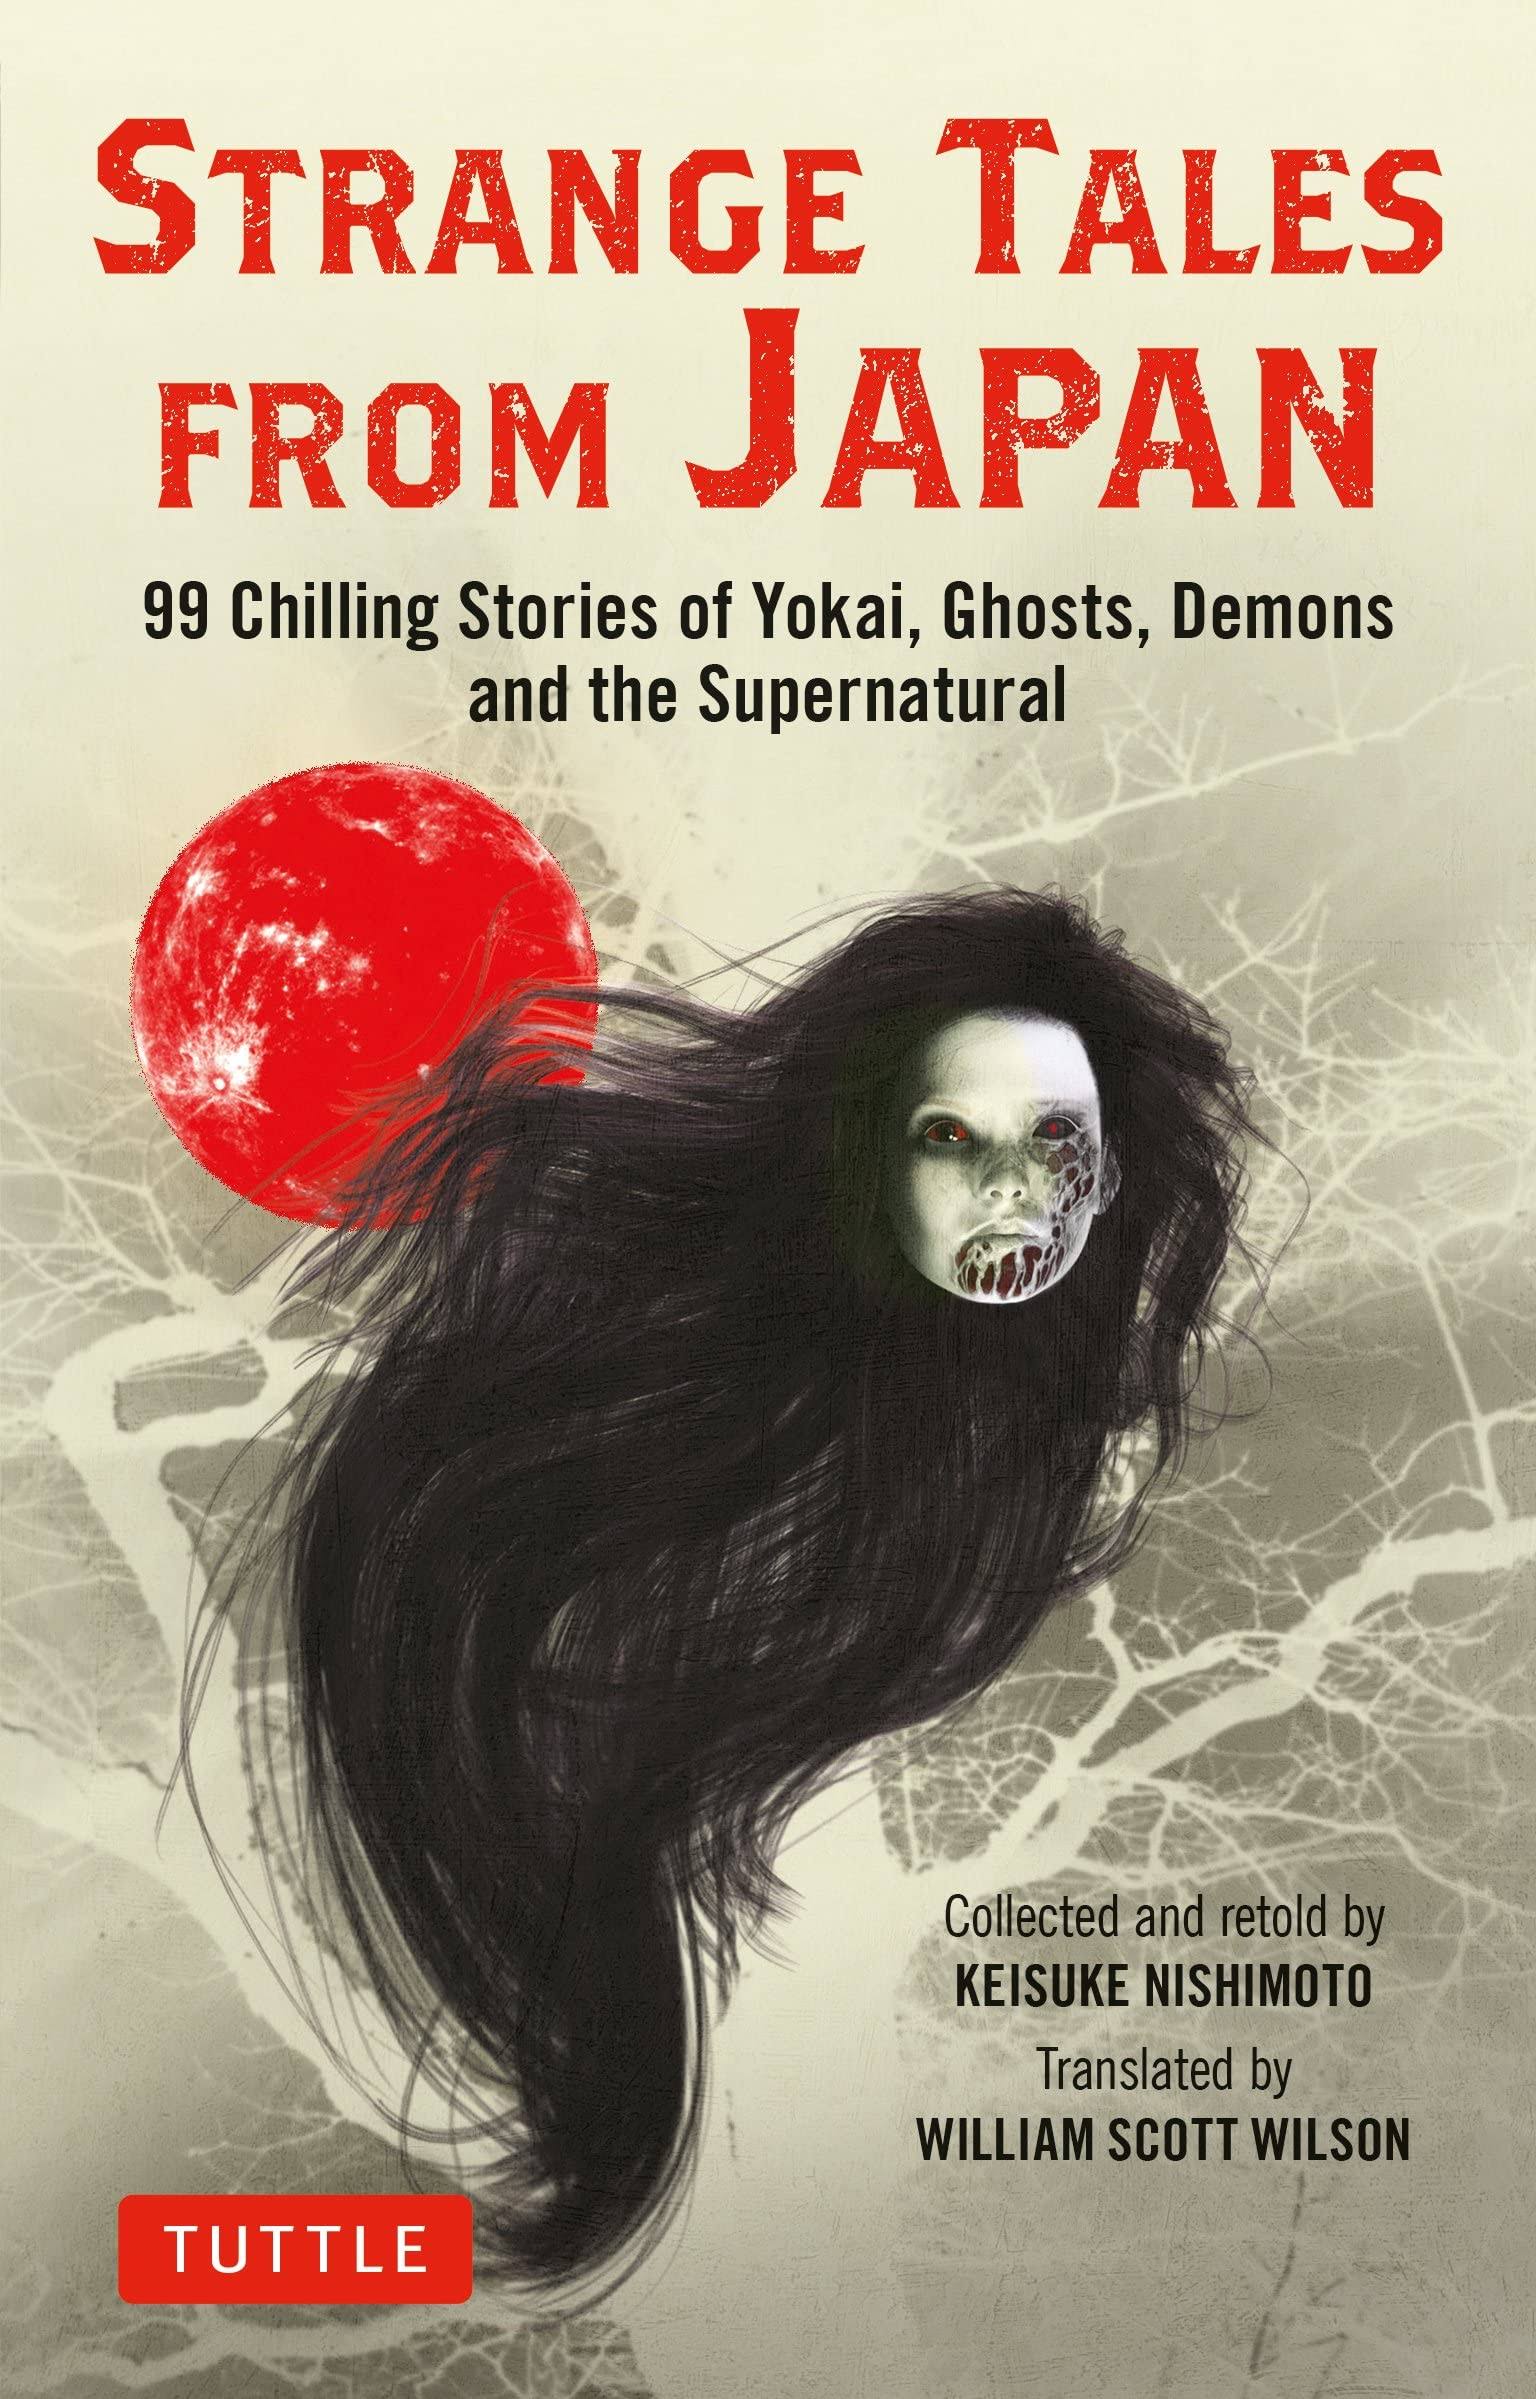 Strange Tales from Japan: 99 Chilling Stories of Yokai, Ghosts, Demons and the Supernatural [Book]